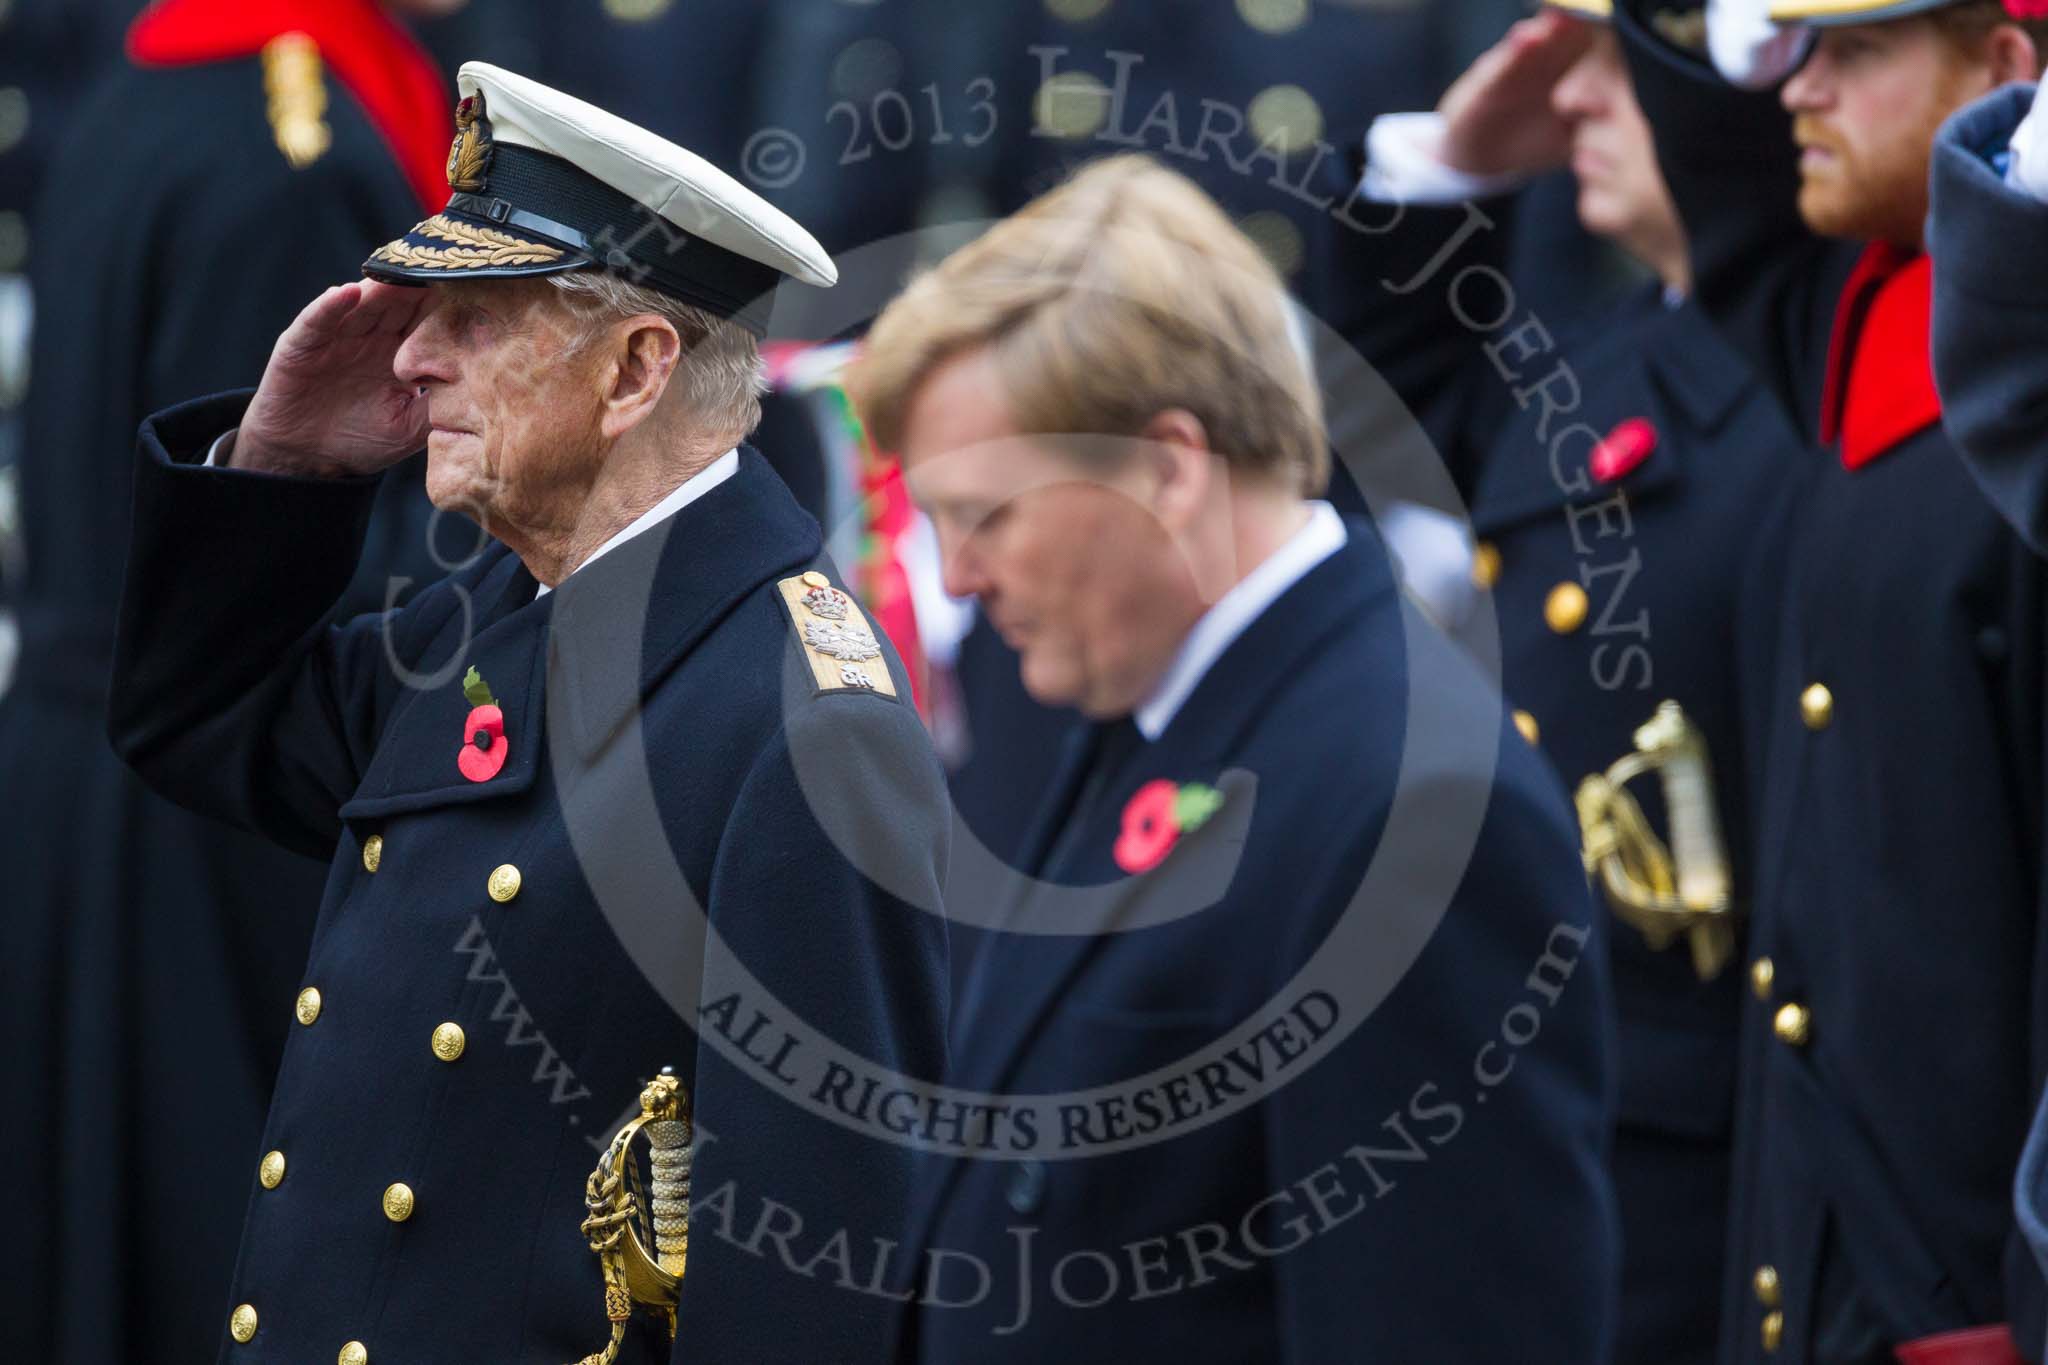 Remembrance Sunday at the Cenotaph 2015: HM The Duke of Edinburgh,saluting, next to  HM The King of the Netherlands, Willem-Alexander, at the Cenotaph on Remembrance Sunday 2015. Image #141, 08 November 2015 10:59 Whitehall, London, UK